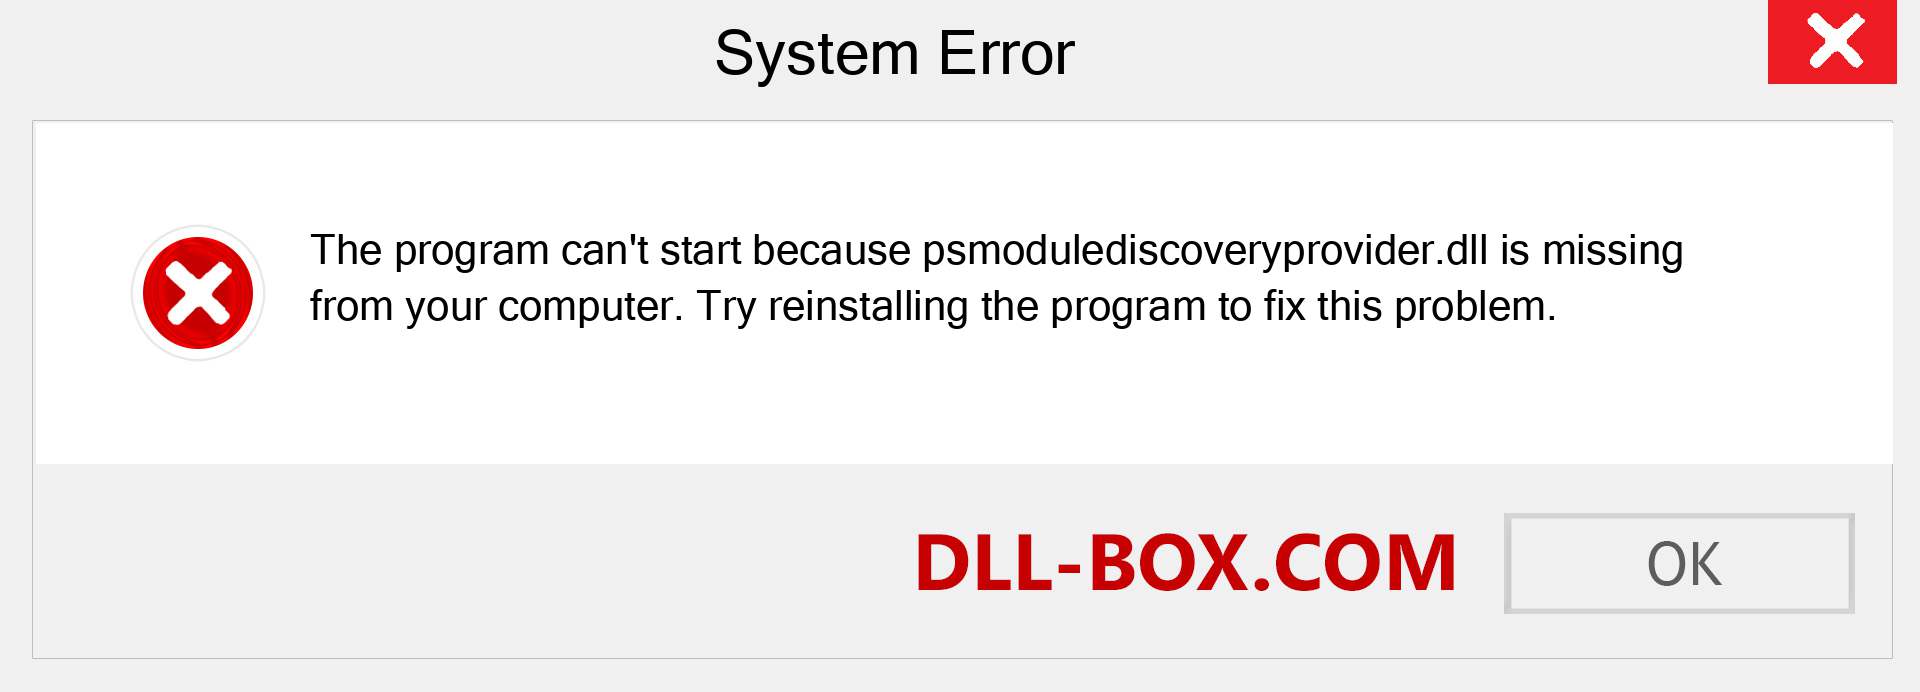  psmodulediscoveryprovider.dll file is missing?. Download for Windows 7, 8, 10 - Fix  psmodulediscoveryprovider dll Missing Error on Windows, photos, images